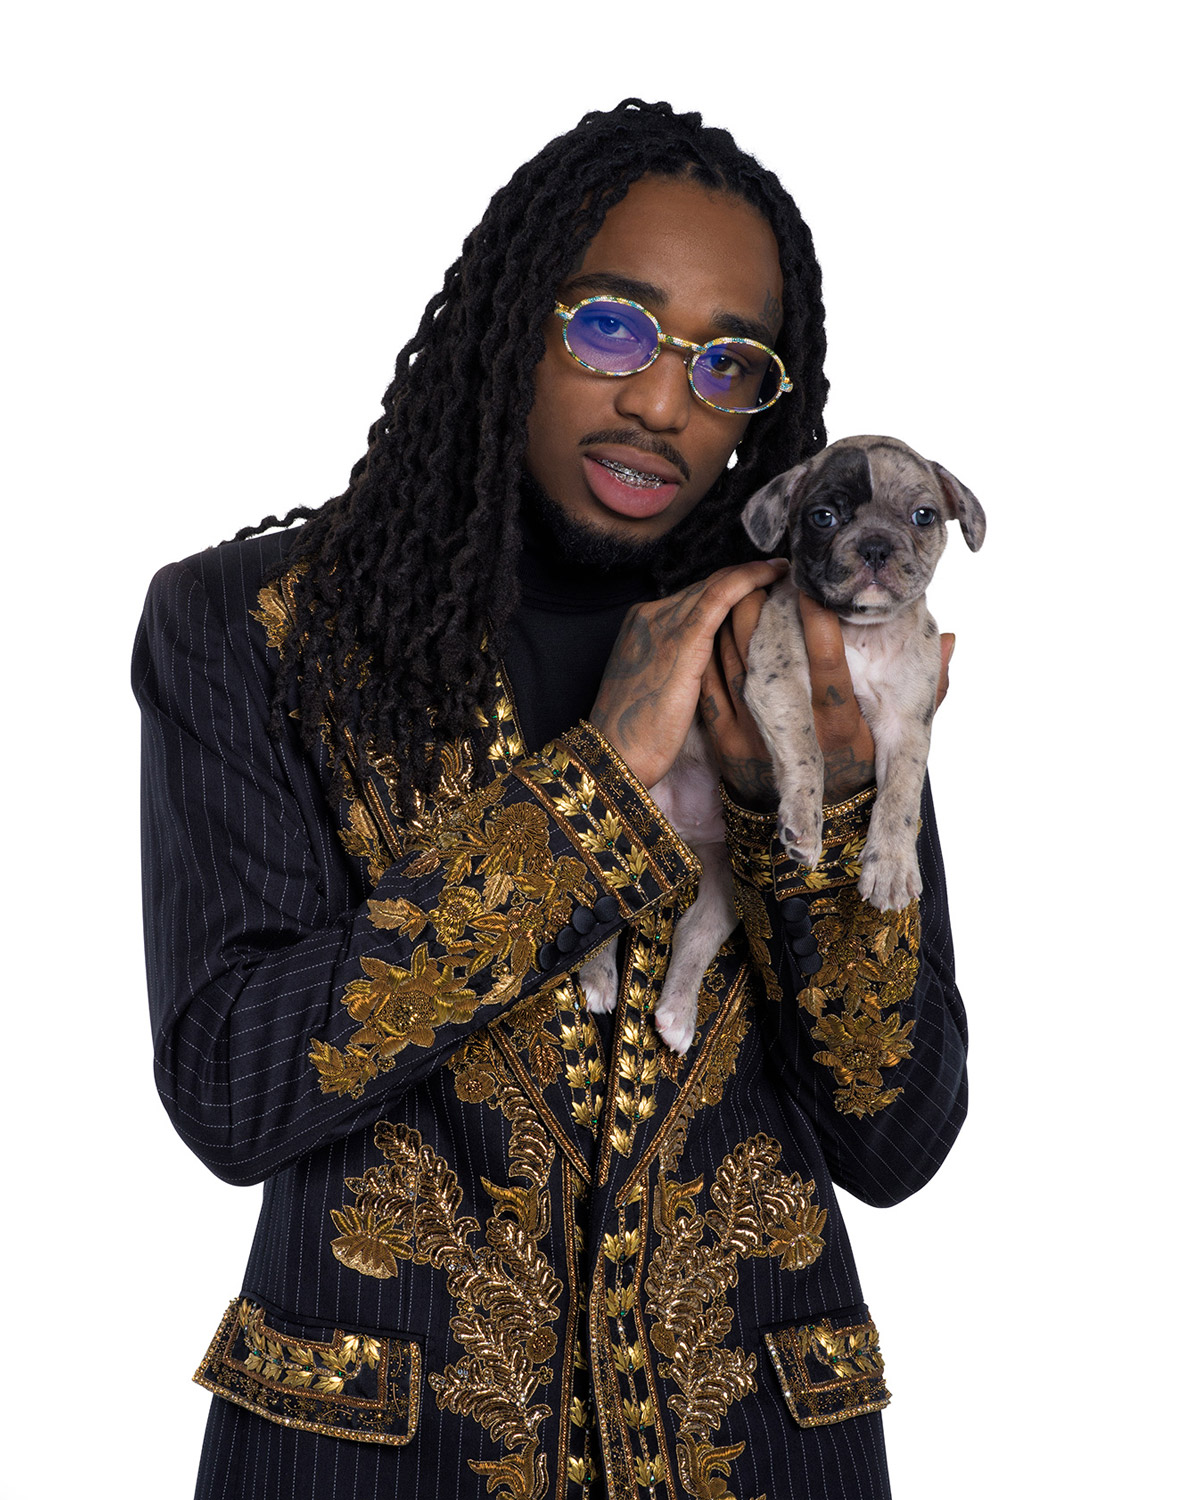 Quavo Talks Icing Out Braves Fitted for Lids Collab, 'Culture 3